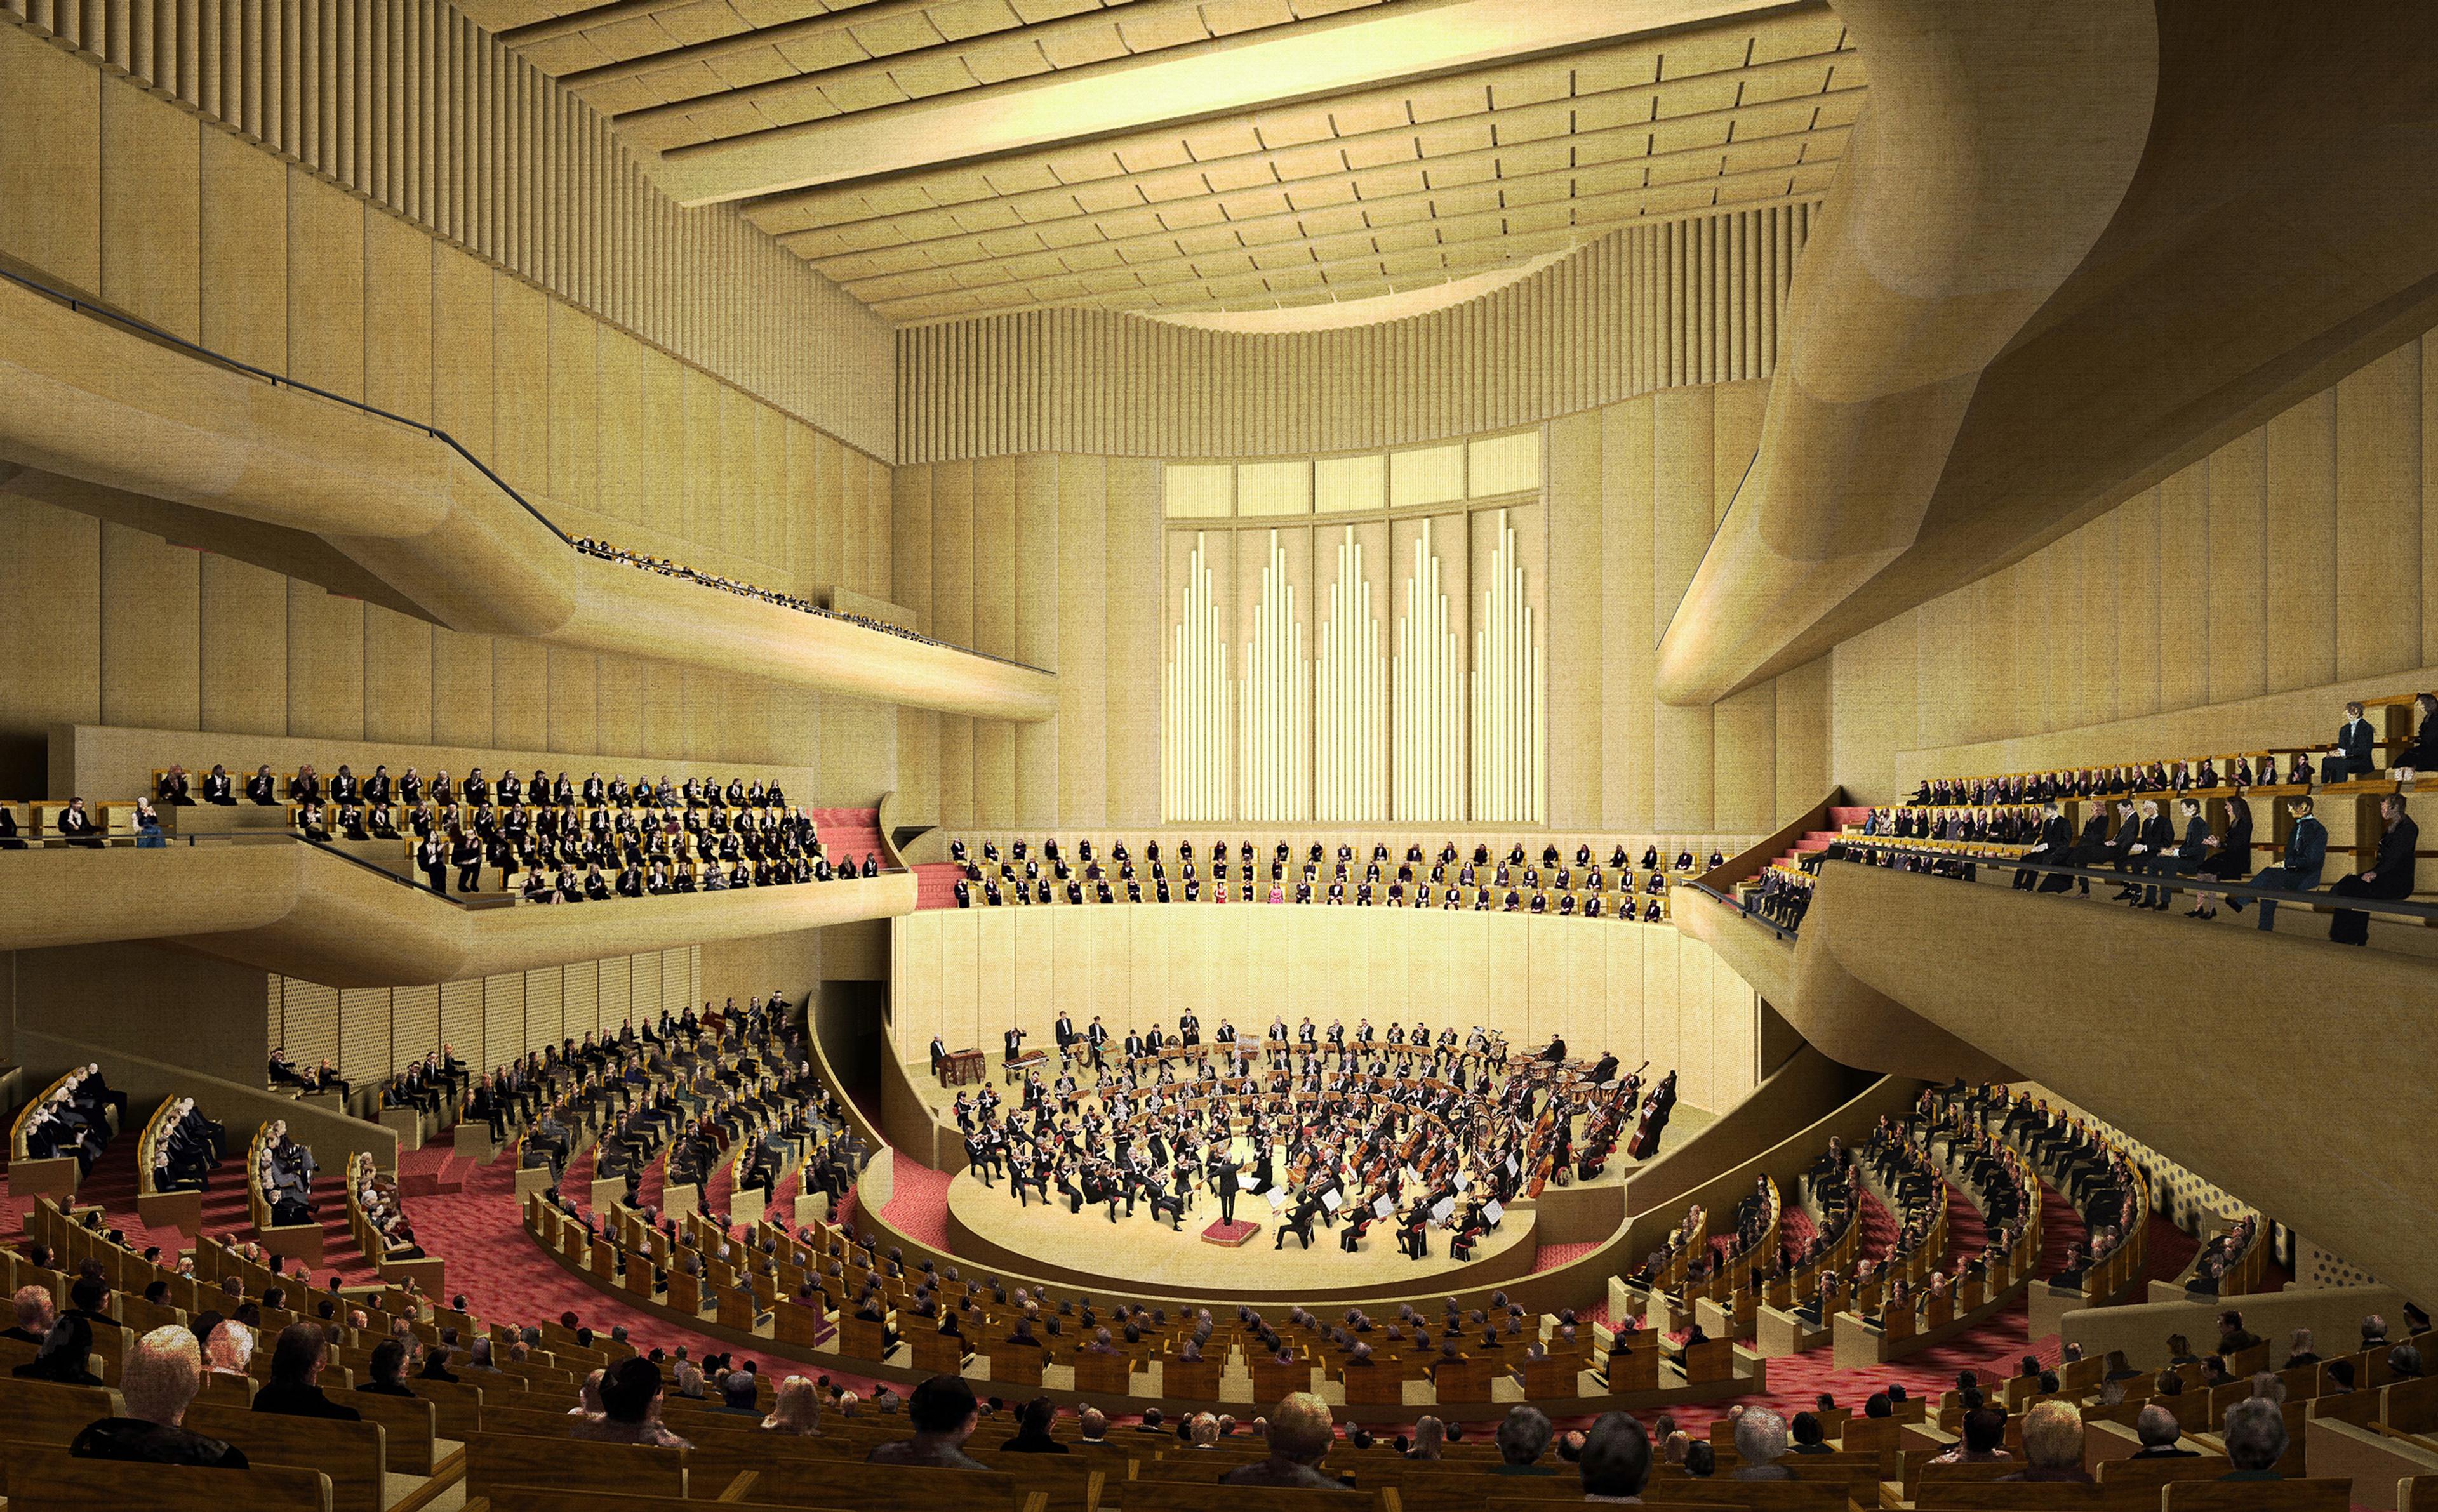 architectural rendering inside proposed vilnius national concert hall during performance